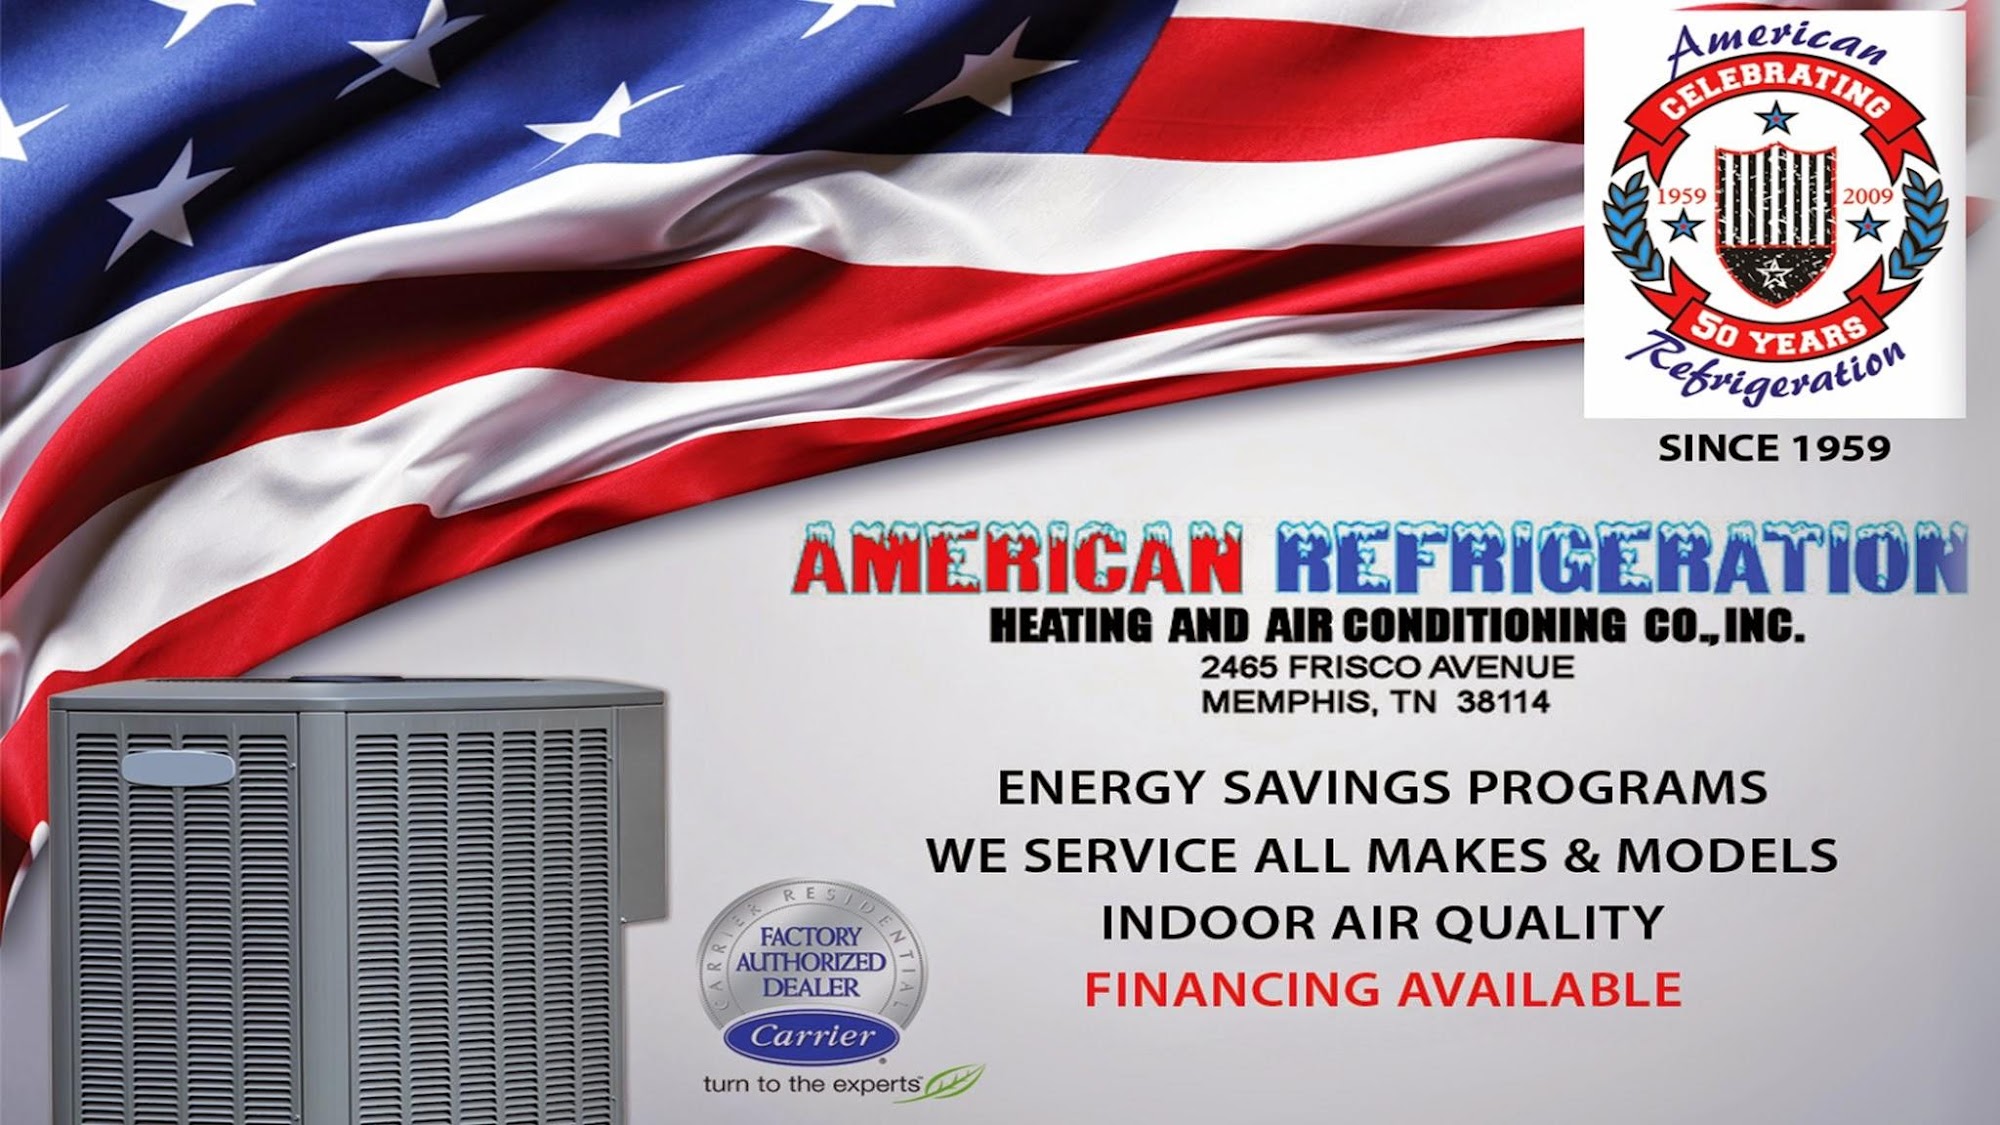 American Refrigeration Heating and Air Conditioning Company, Inc.